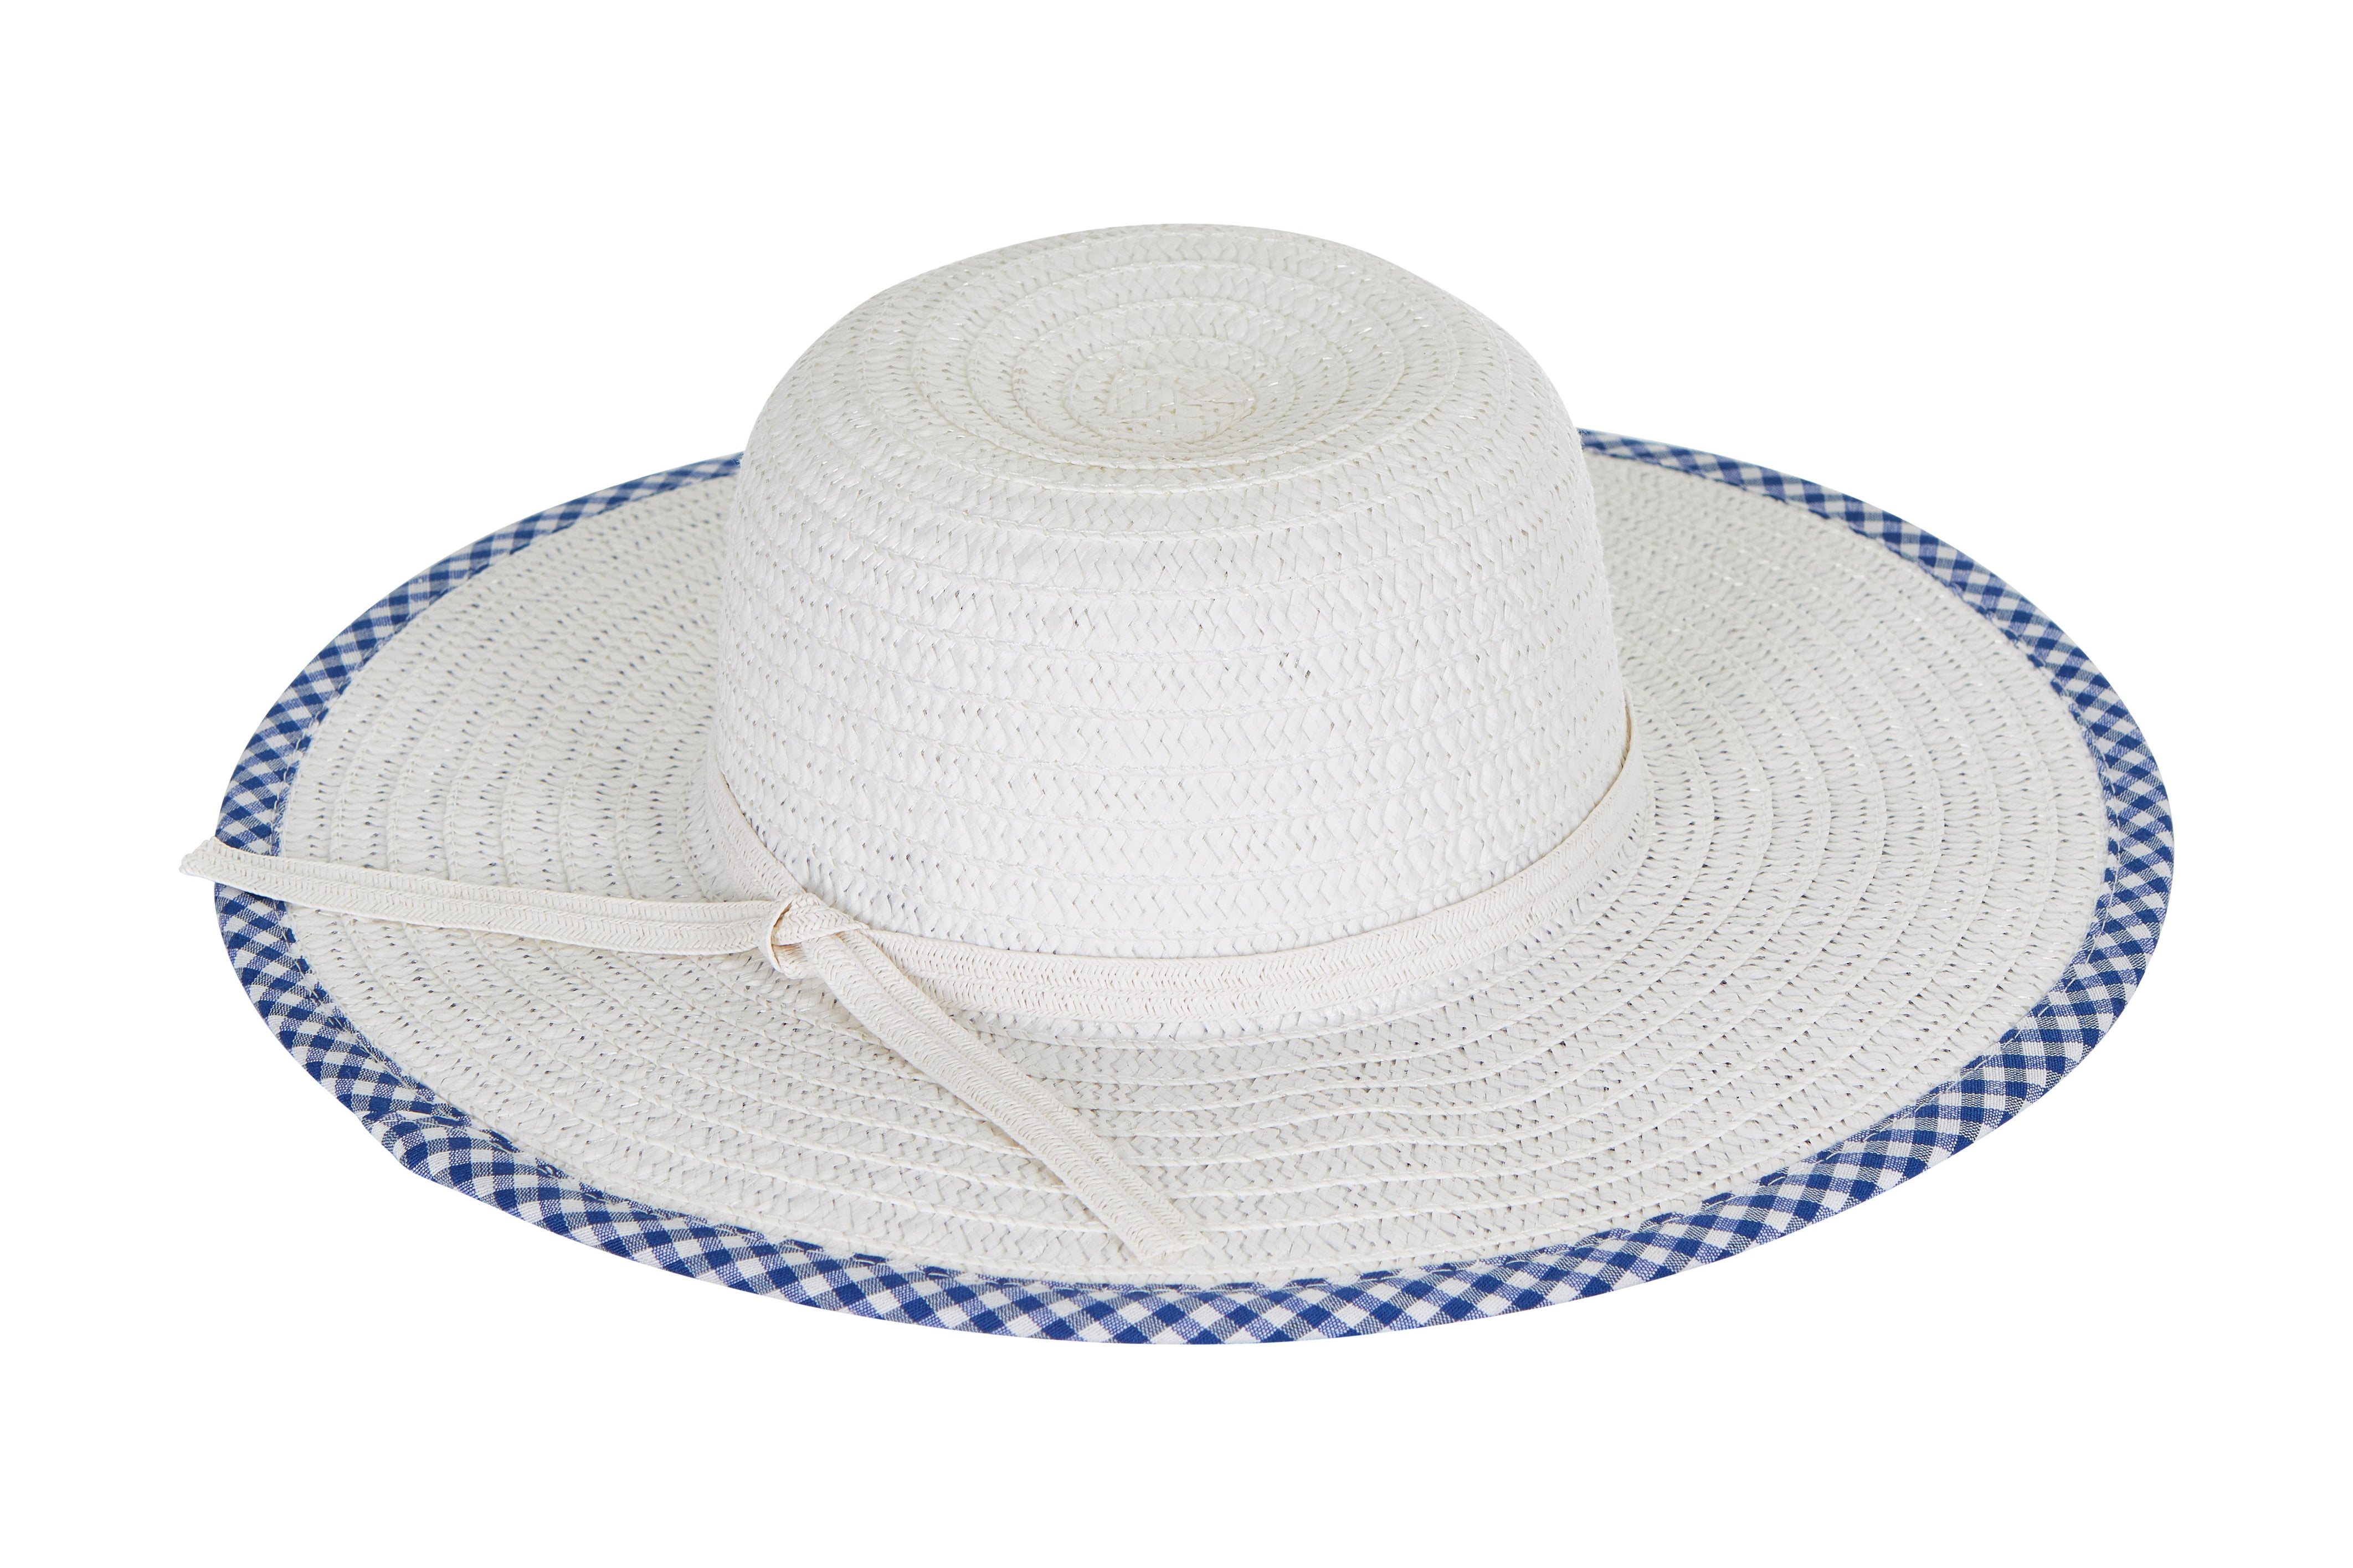 i-Smalls Women's Paper Floppy Sun Summer Hat with Stylish Contrast Stripes 